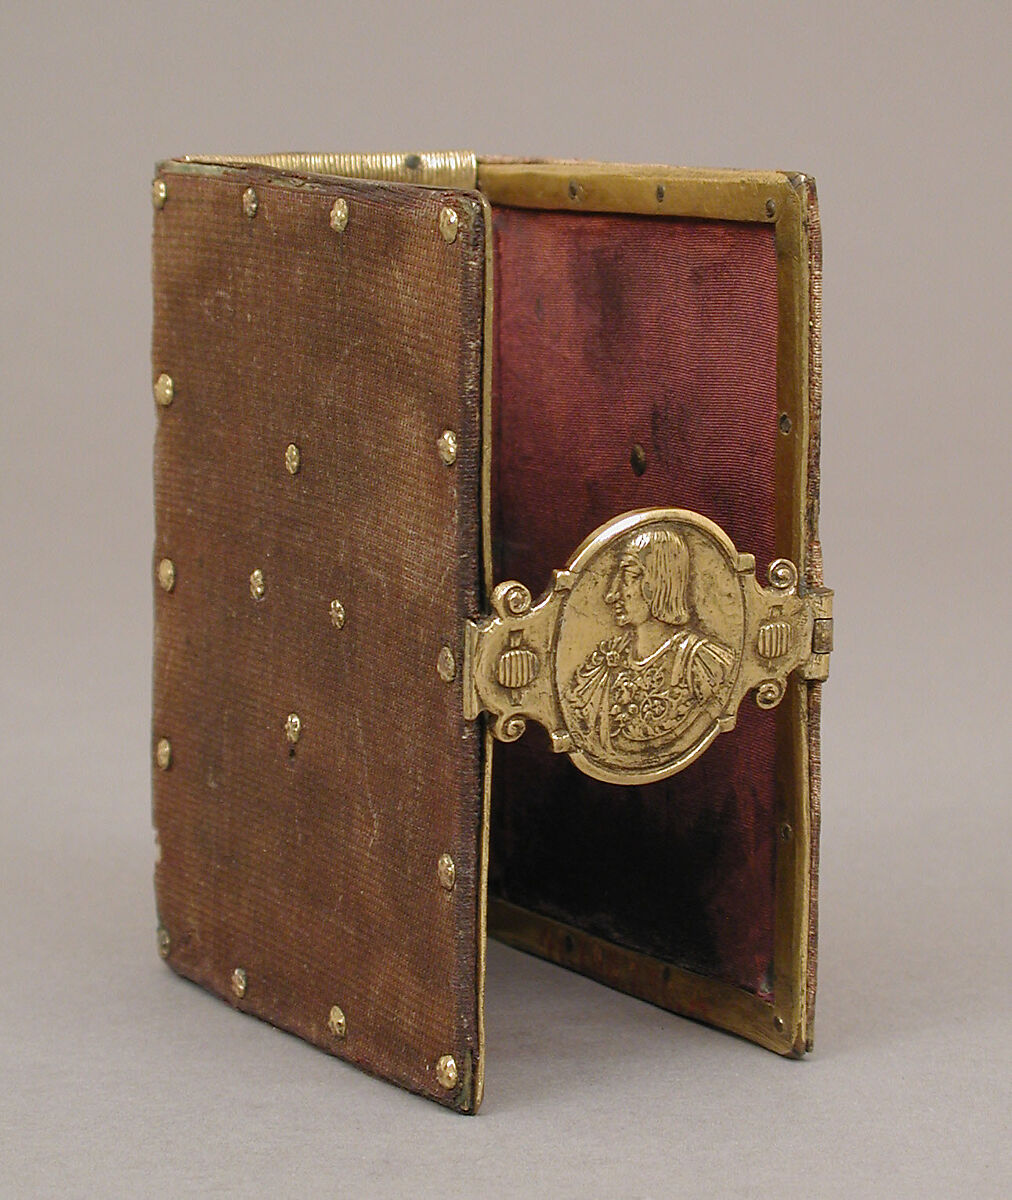 Frame in the form of a book, Gilt bronze, velvet, French, probably Paris 